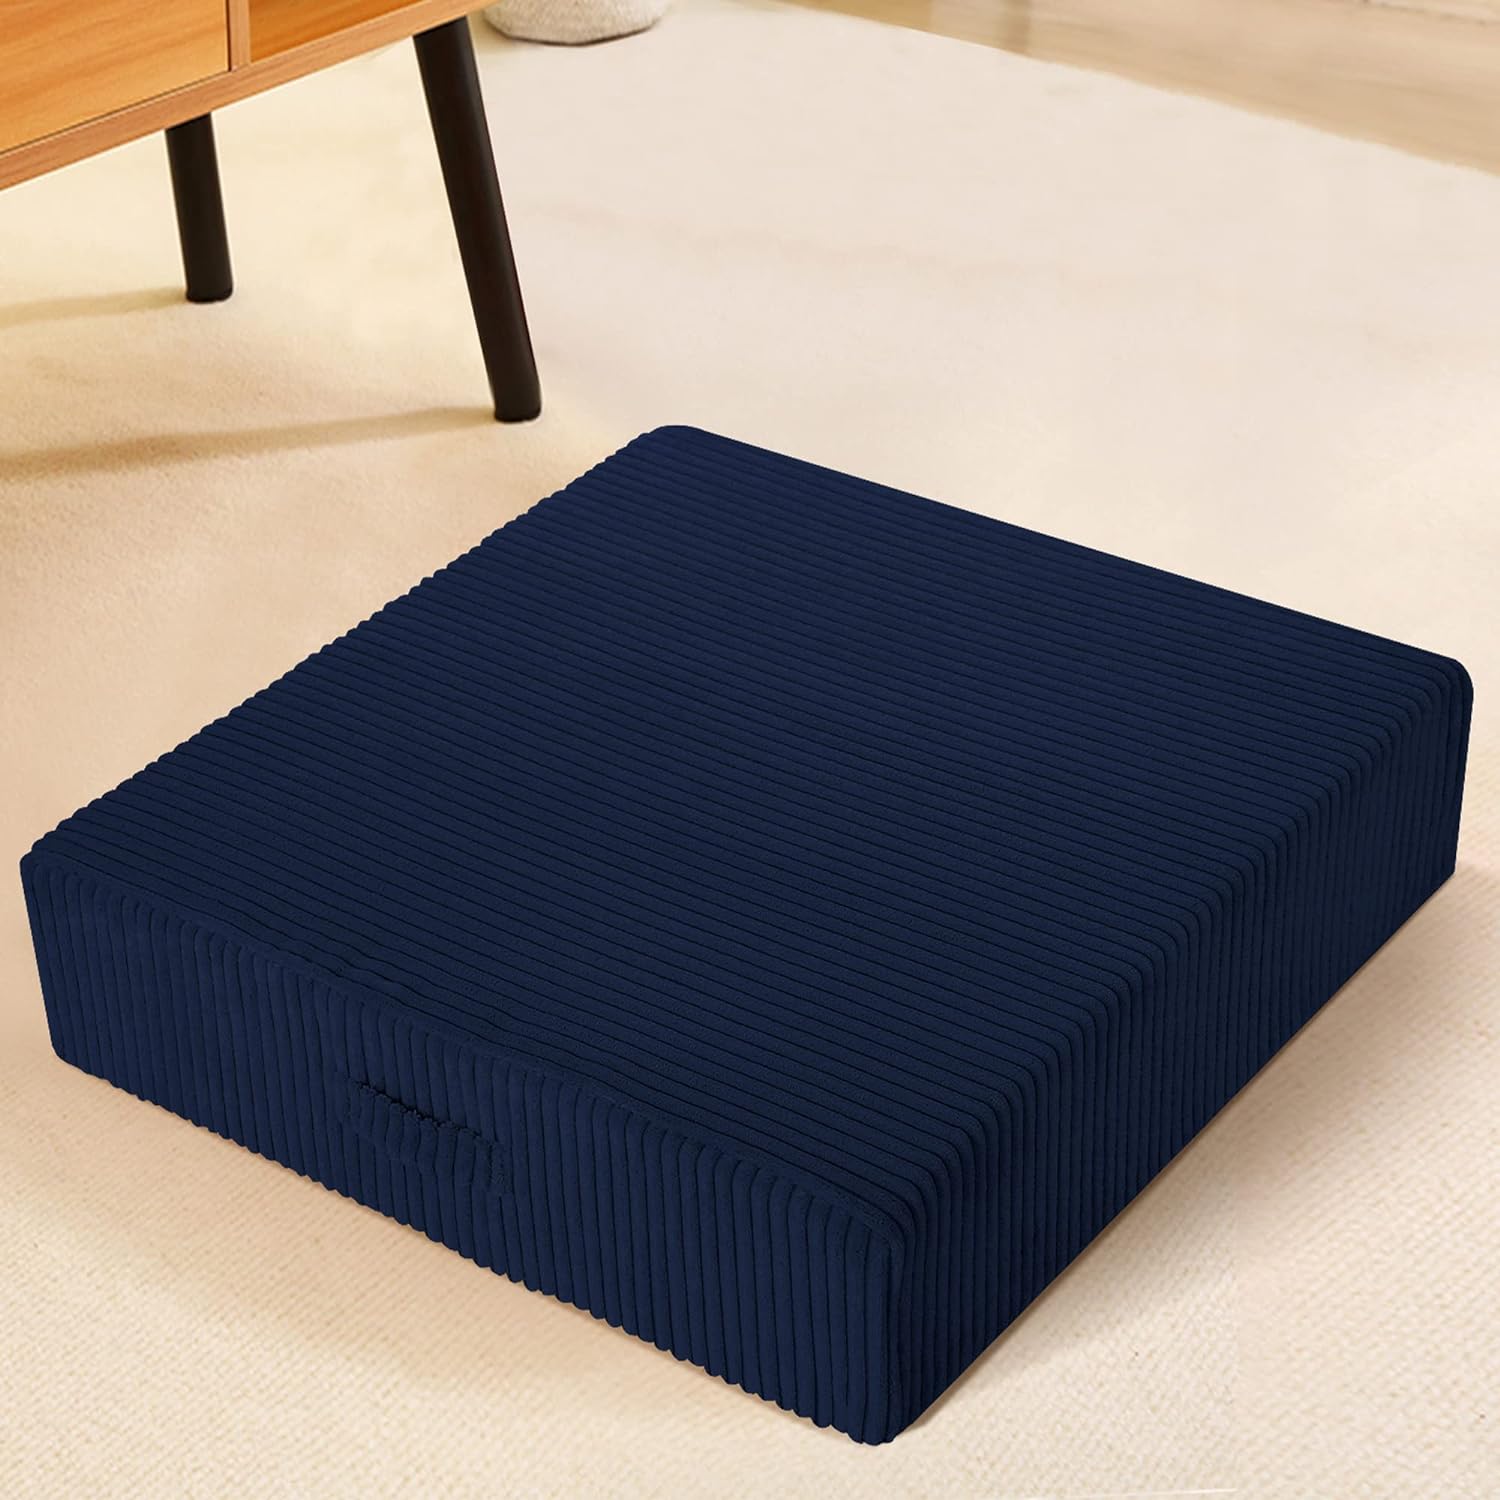 MeMoreCool Large Floor Pillow Adults Floor Cushion for Sitting, Washable Floor Pillow Seating with Firm Foam Insert, Corduroy Floor Sitting Pad, Square Meditation Pillow Thick Seat Cushion 22 Inch